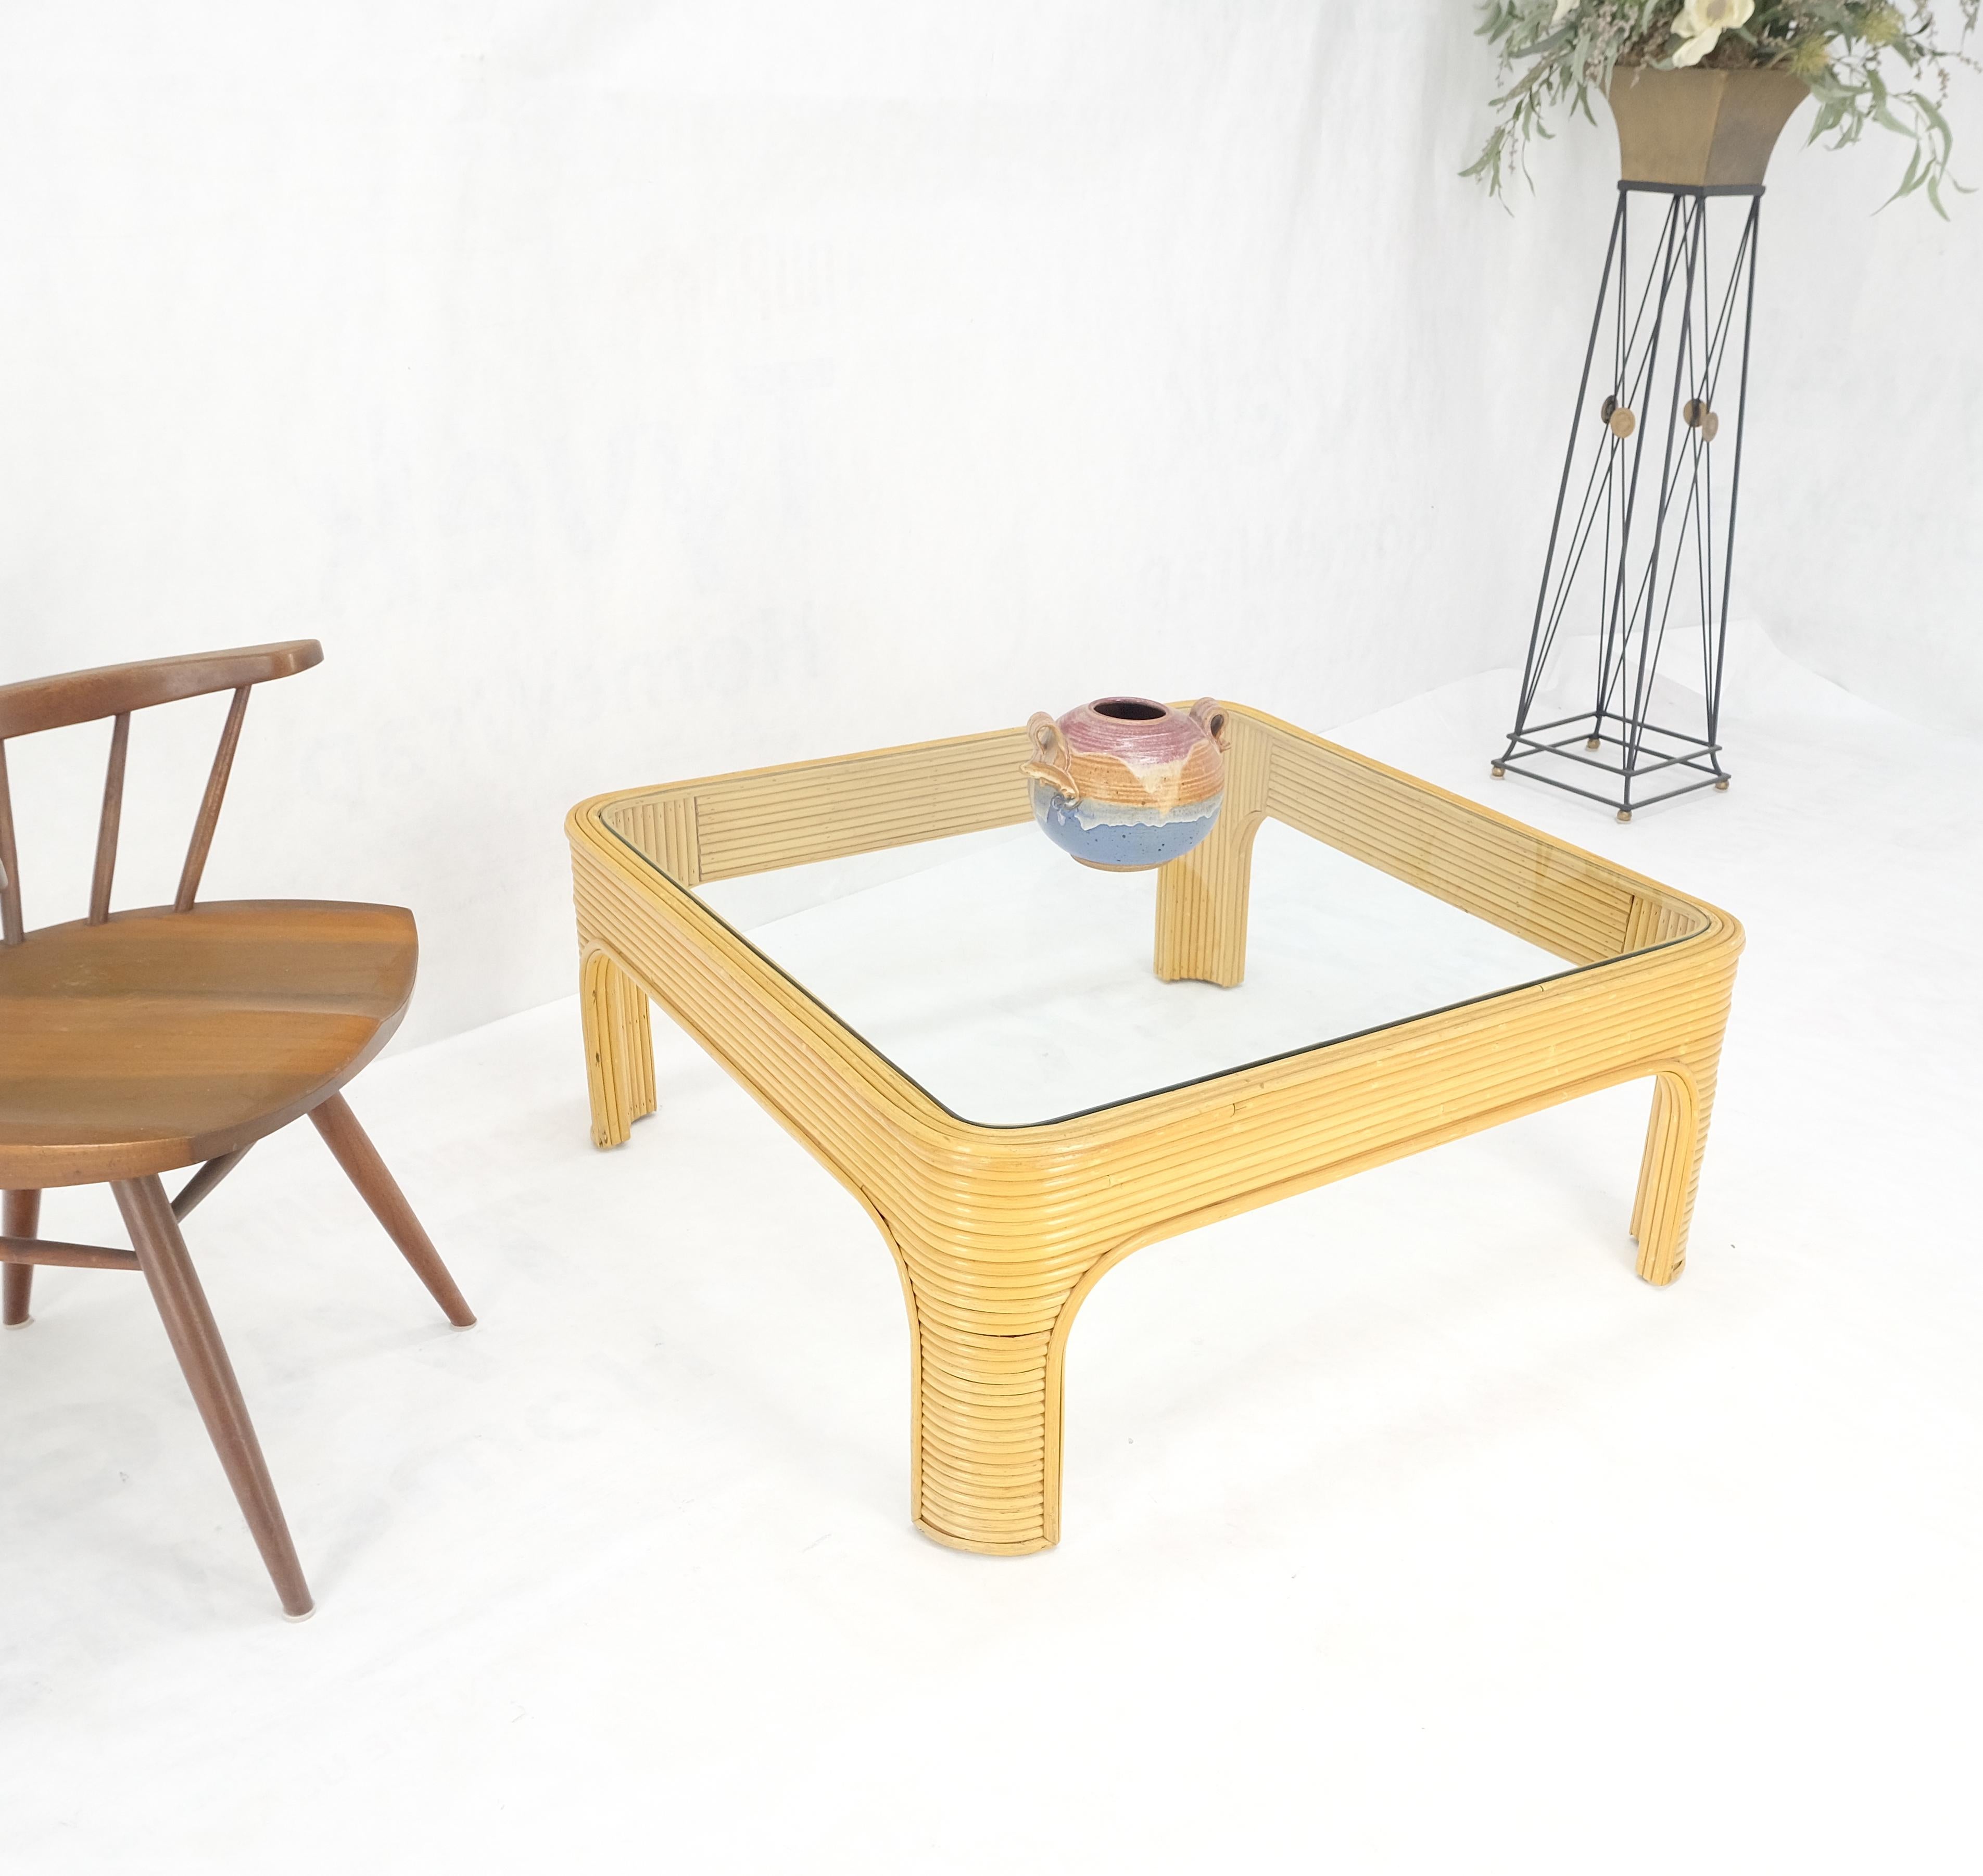 Blond Rattan Bamboo Rounded Corners Square Glass Top Coffee Table 1970's Frankl For Sale 4